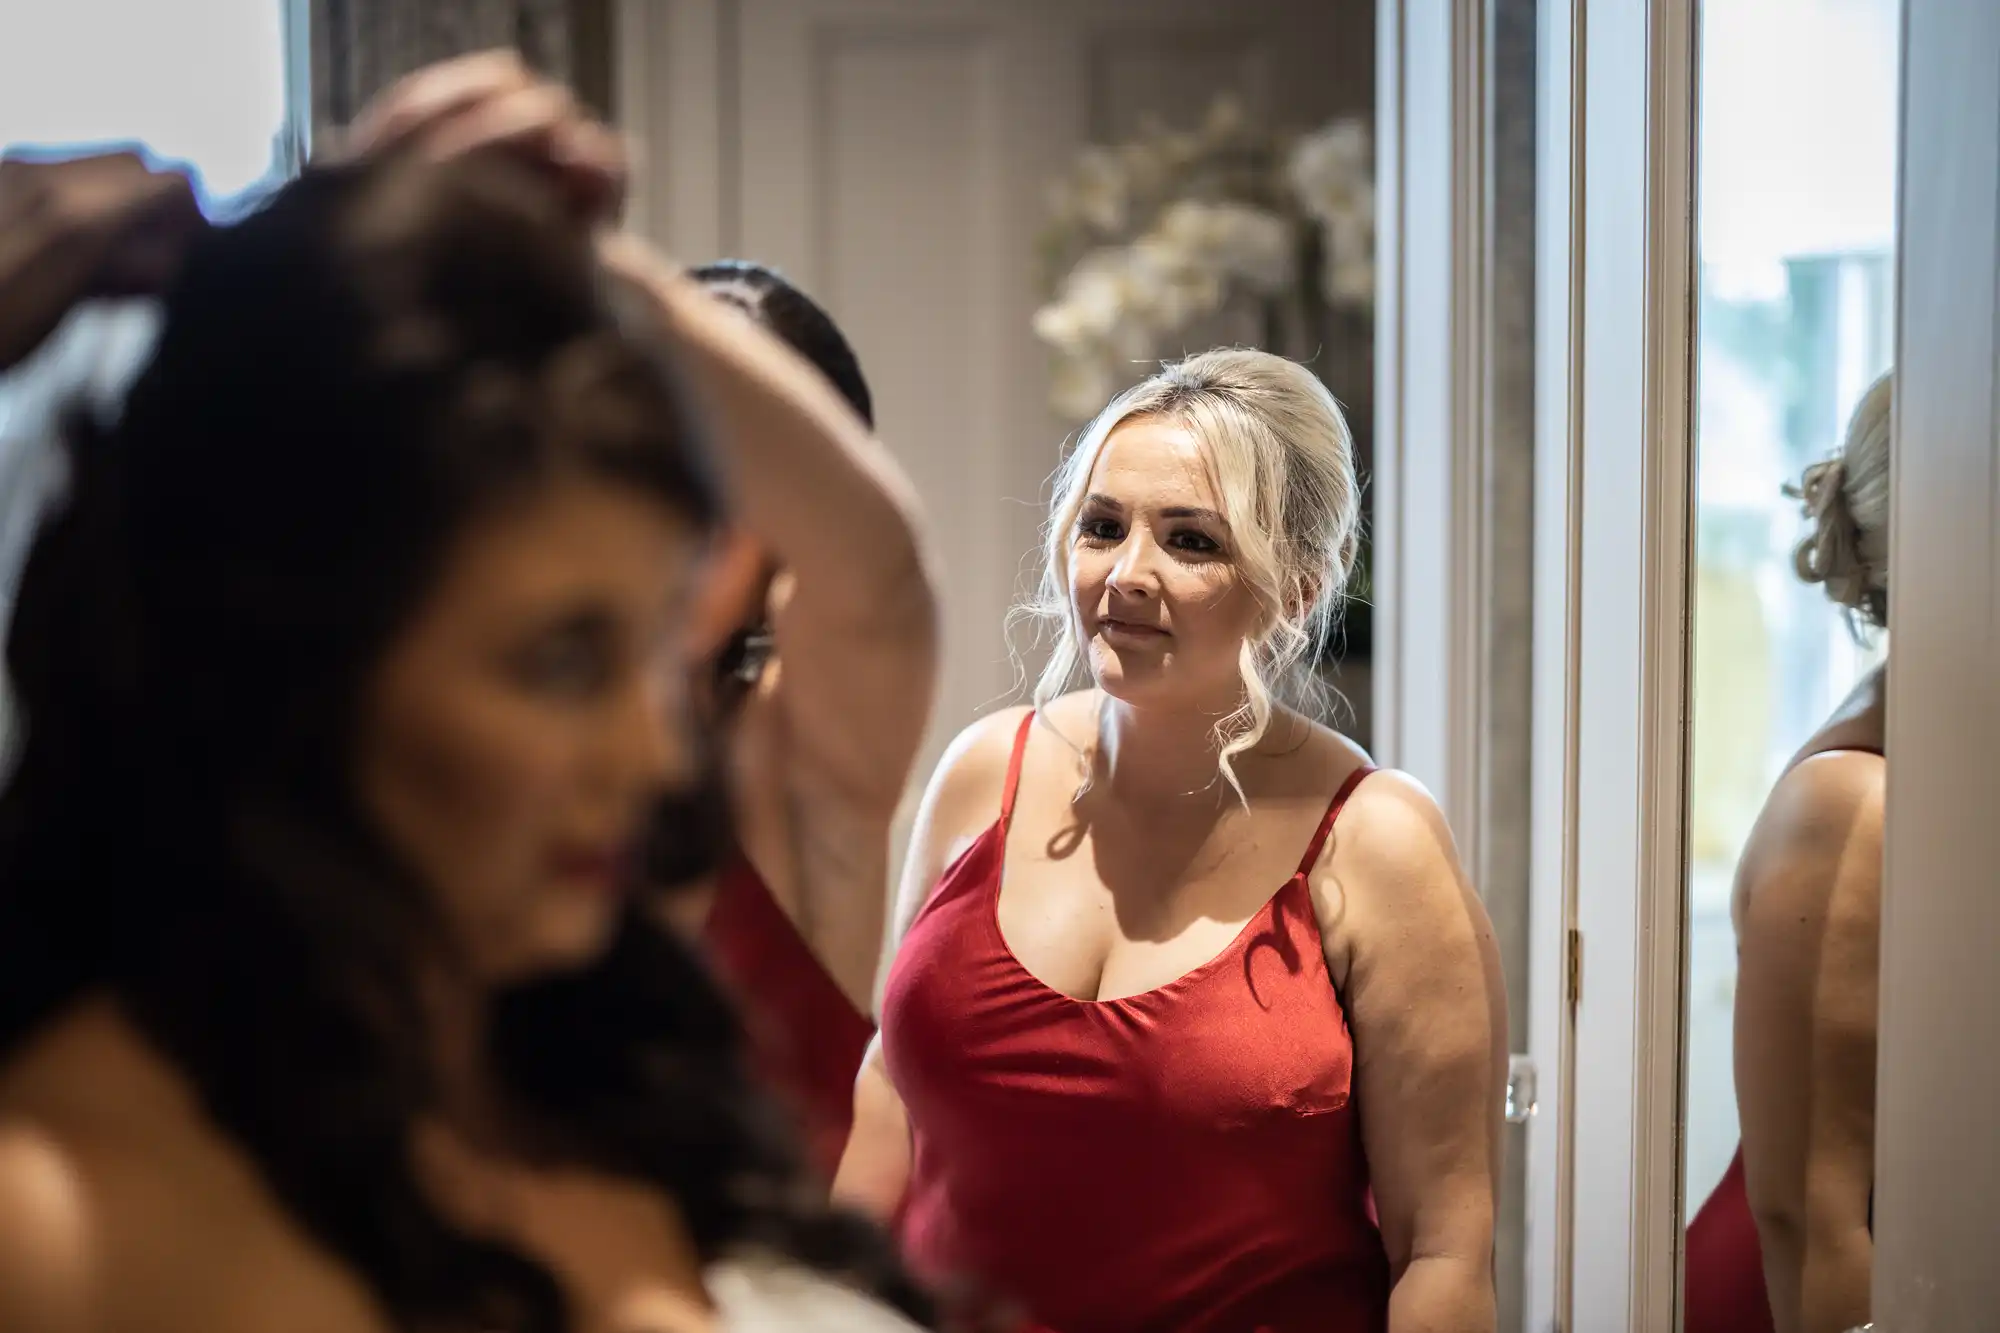 A woman in a red dress observes another woman adjusting her hair in front of a mirror.